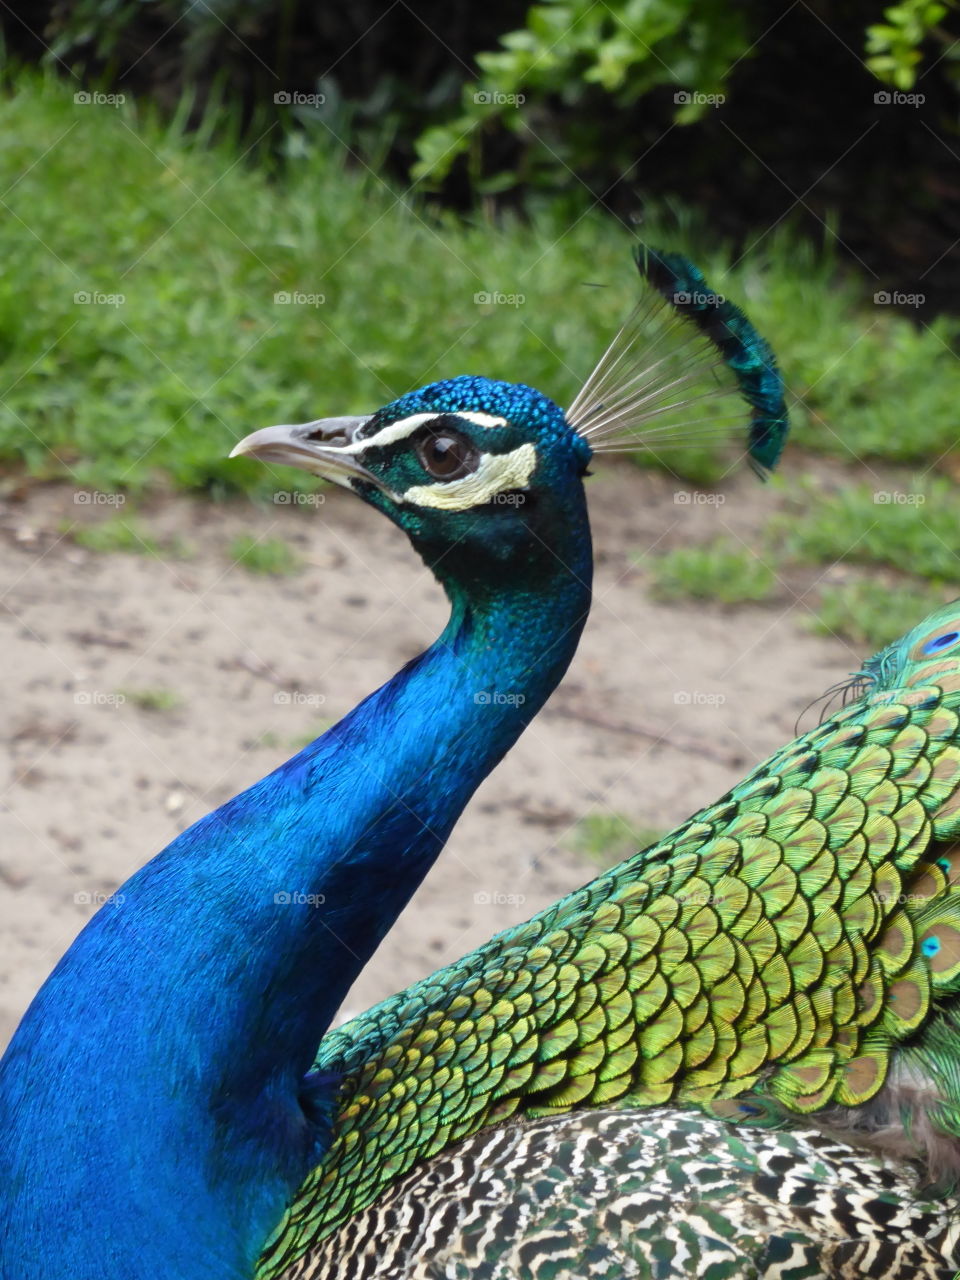 Mr. peacock showing off